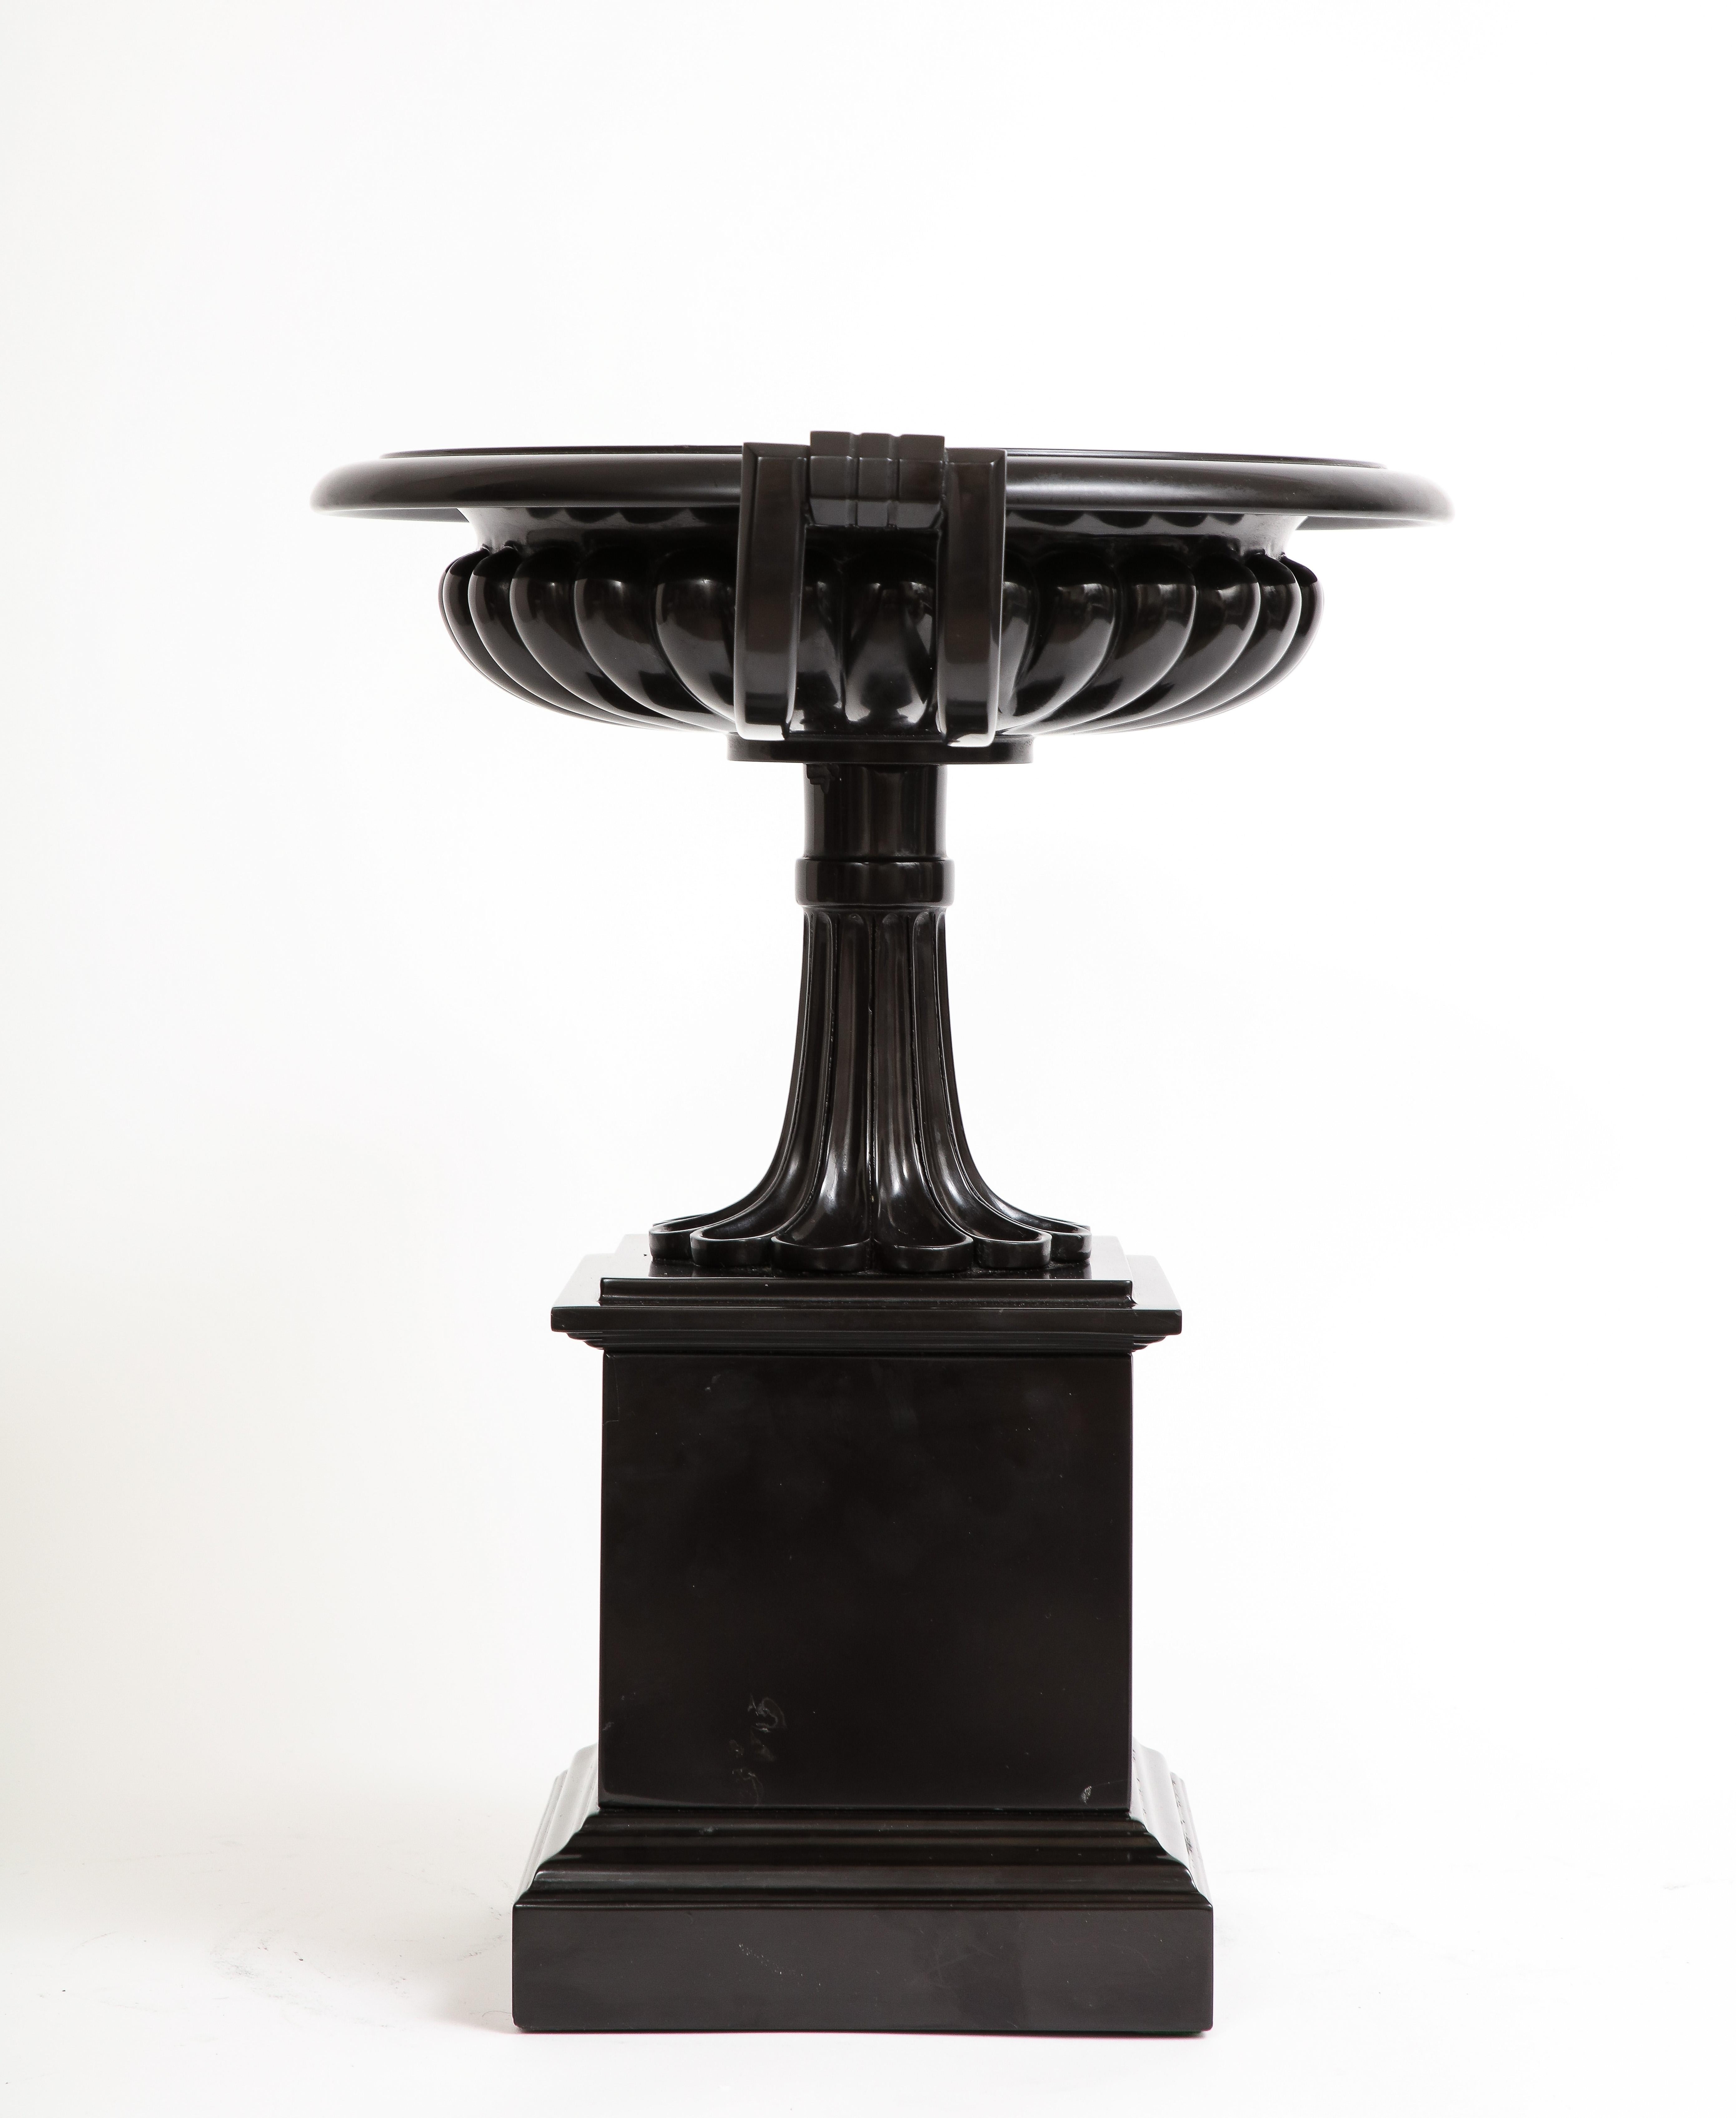 Mid-19th Century English Grand Tour Black Marble Pedestal 2-Handled Centerpiece/Tazza, 1800s For Sale